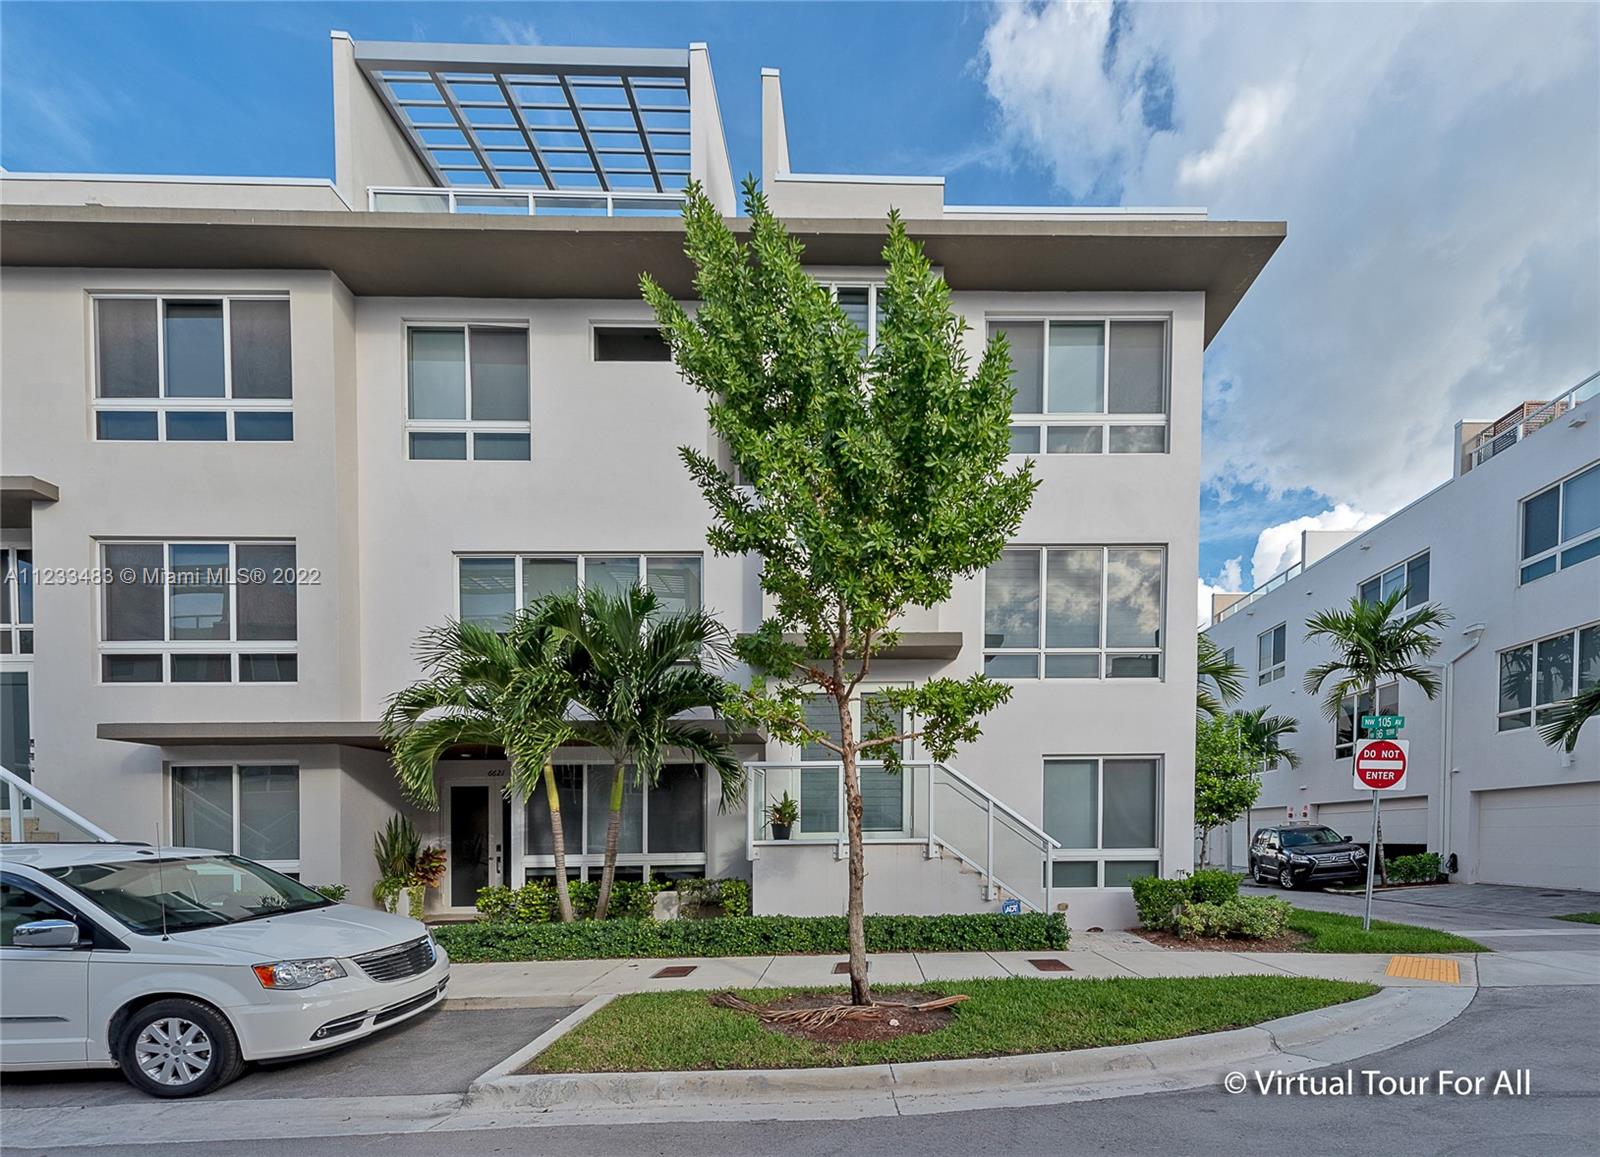 BEAUTIFUL CORNER  3-LEVEL TOWNHOUSE LOCATED IN THE HEART OF DORAL. 4 BEDROOM /3.5 BATHROOMS. . THIS HOME FEATURES IMPACT WINDOWS, AN ELEVATOR INSIDE THE UNIT; A MODERN KITCHEN WITH SS APPLIANCES, AND QUARTZ COUNTERTOPS. A MUST-SEE!!!!